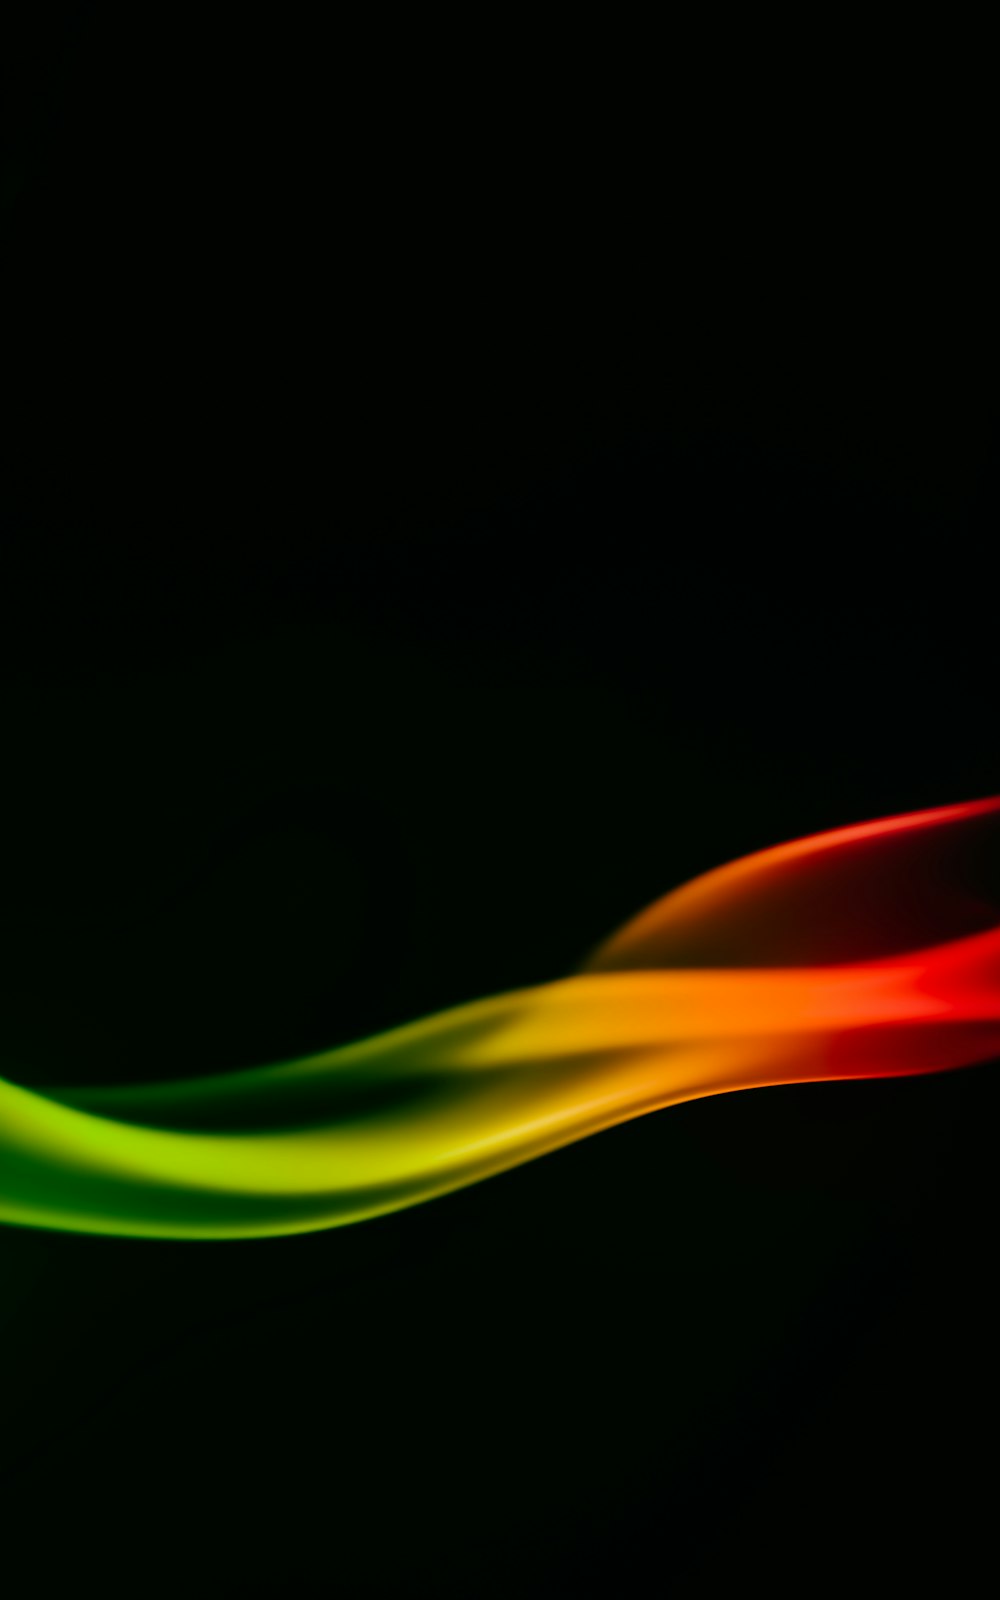 a red, yellow, and green wave on a black background